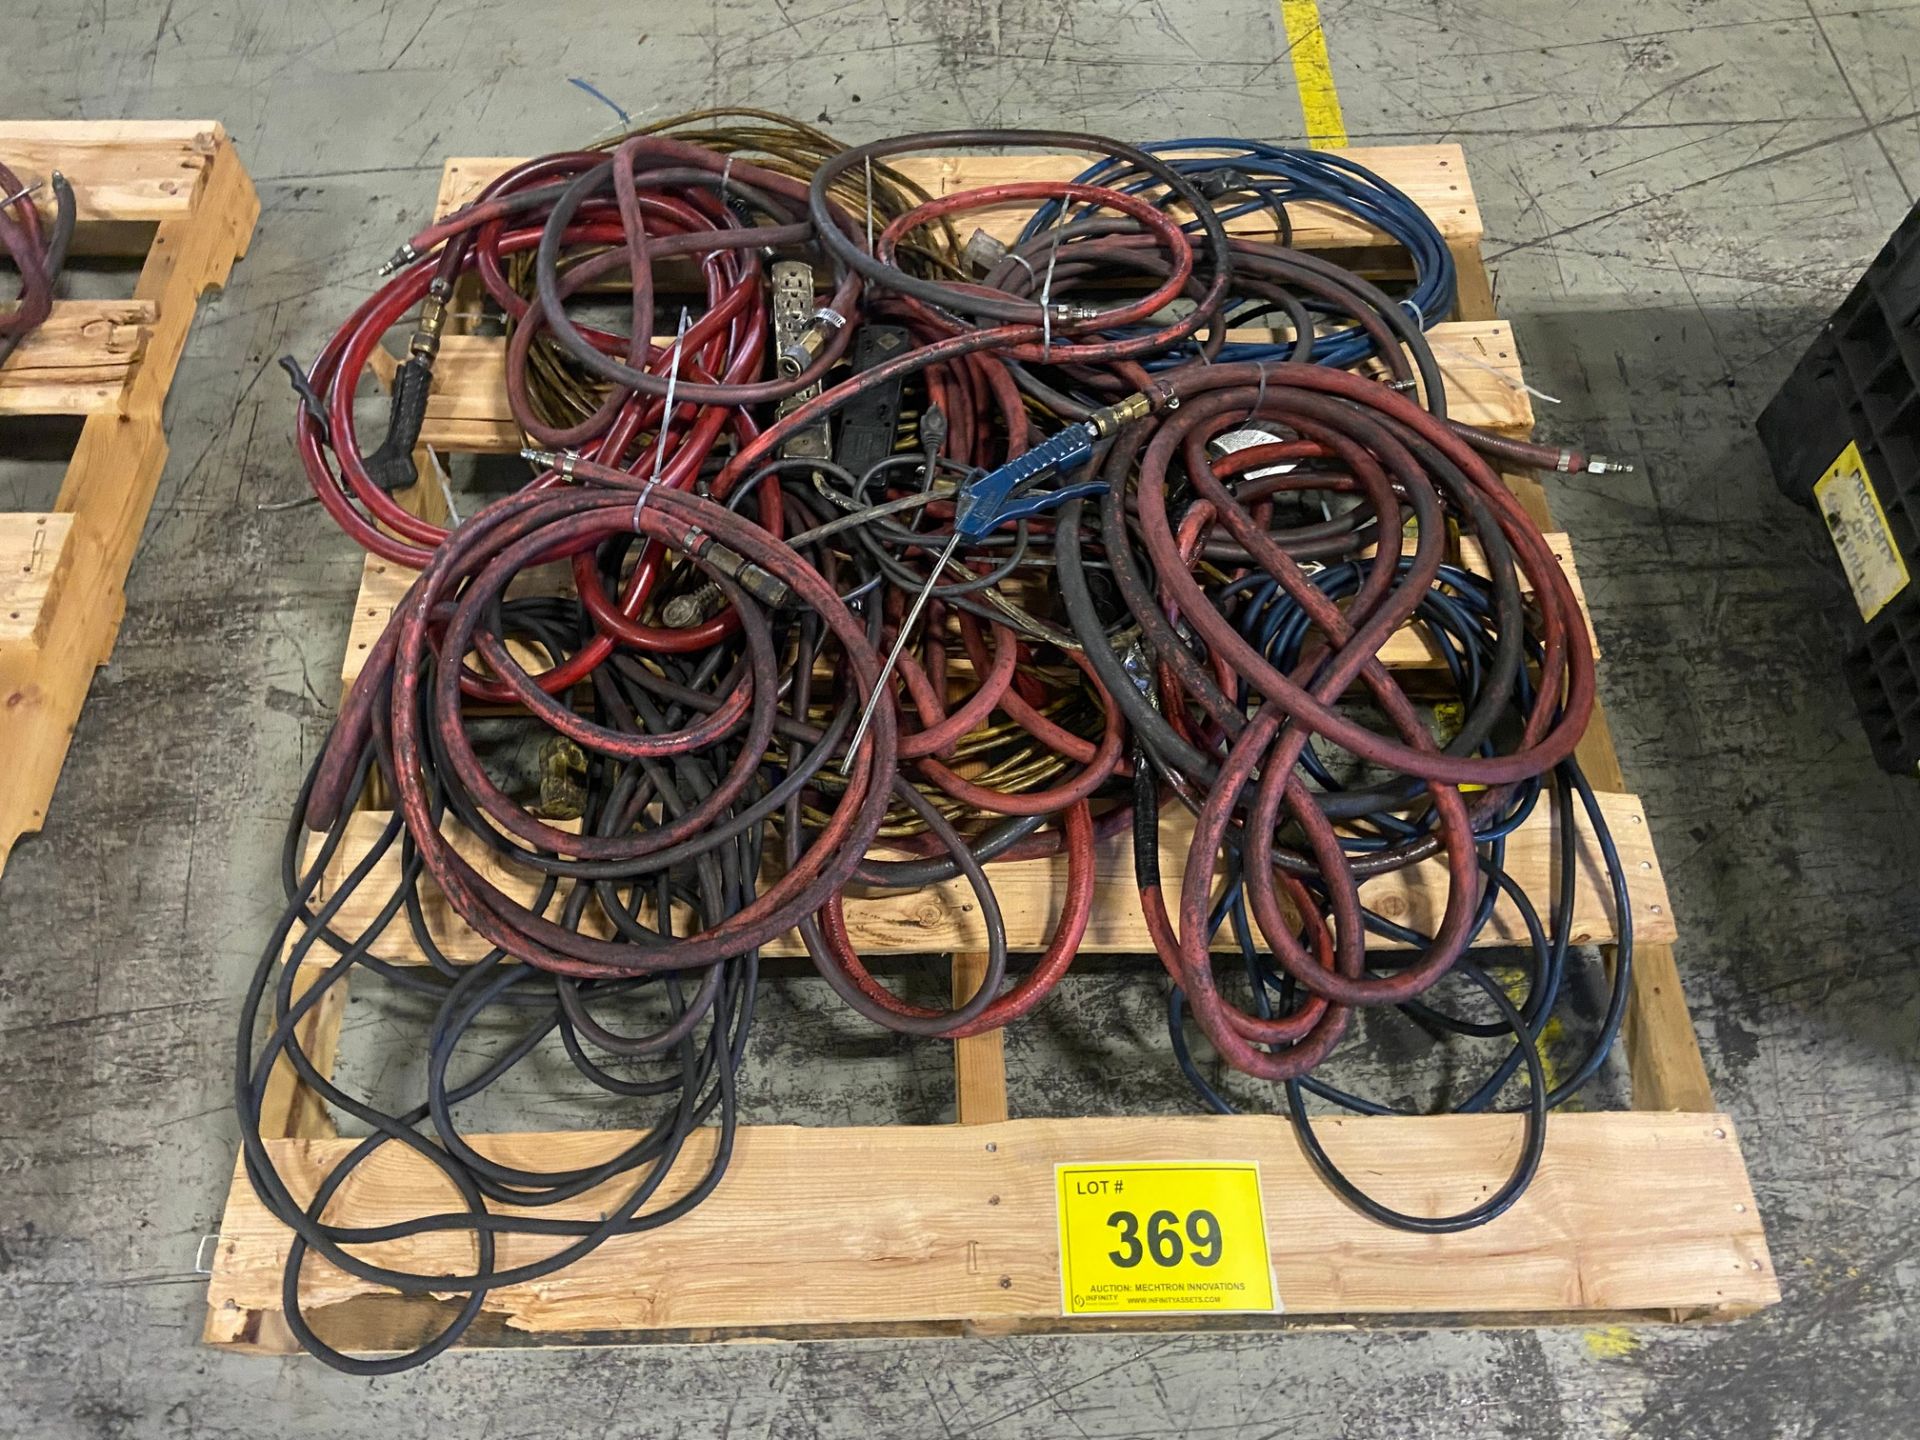 PALLET ASSORTED AIRHOSE & EXTENSION CORD